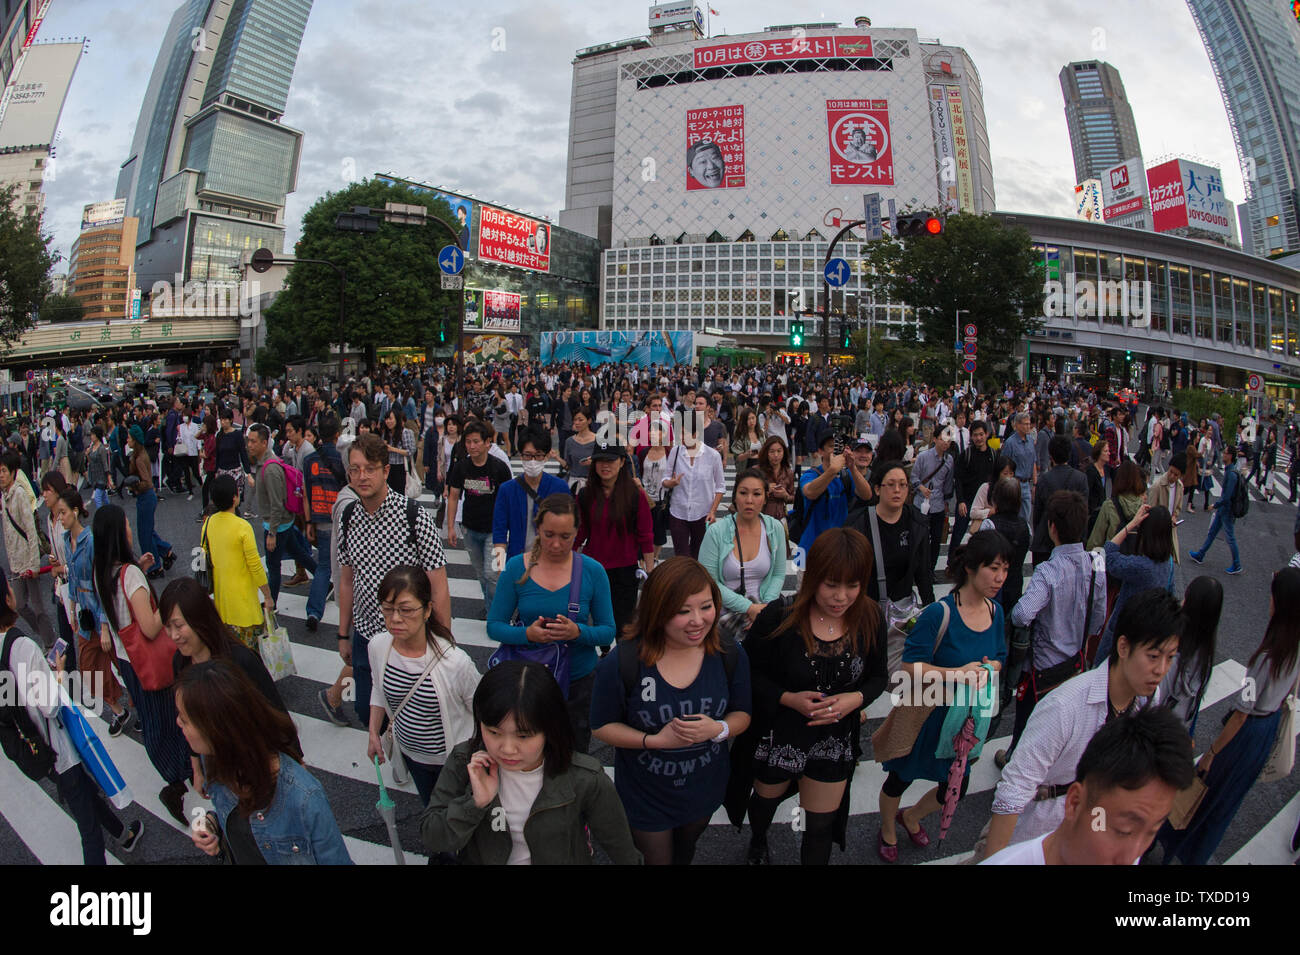 Shibuya Crossing in Tokyo, Japan, is famous for it's extremely busy scramble crosswalk, with pedestrians crossing in all directions at one time. Stock Photo